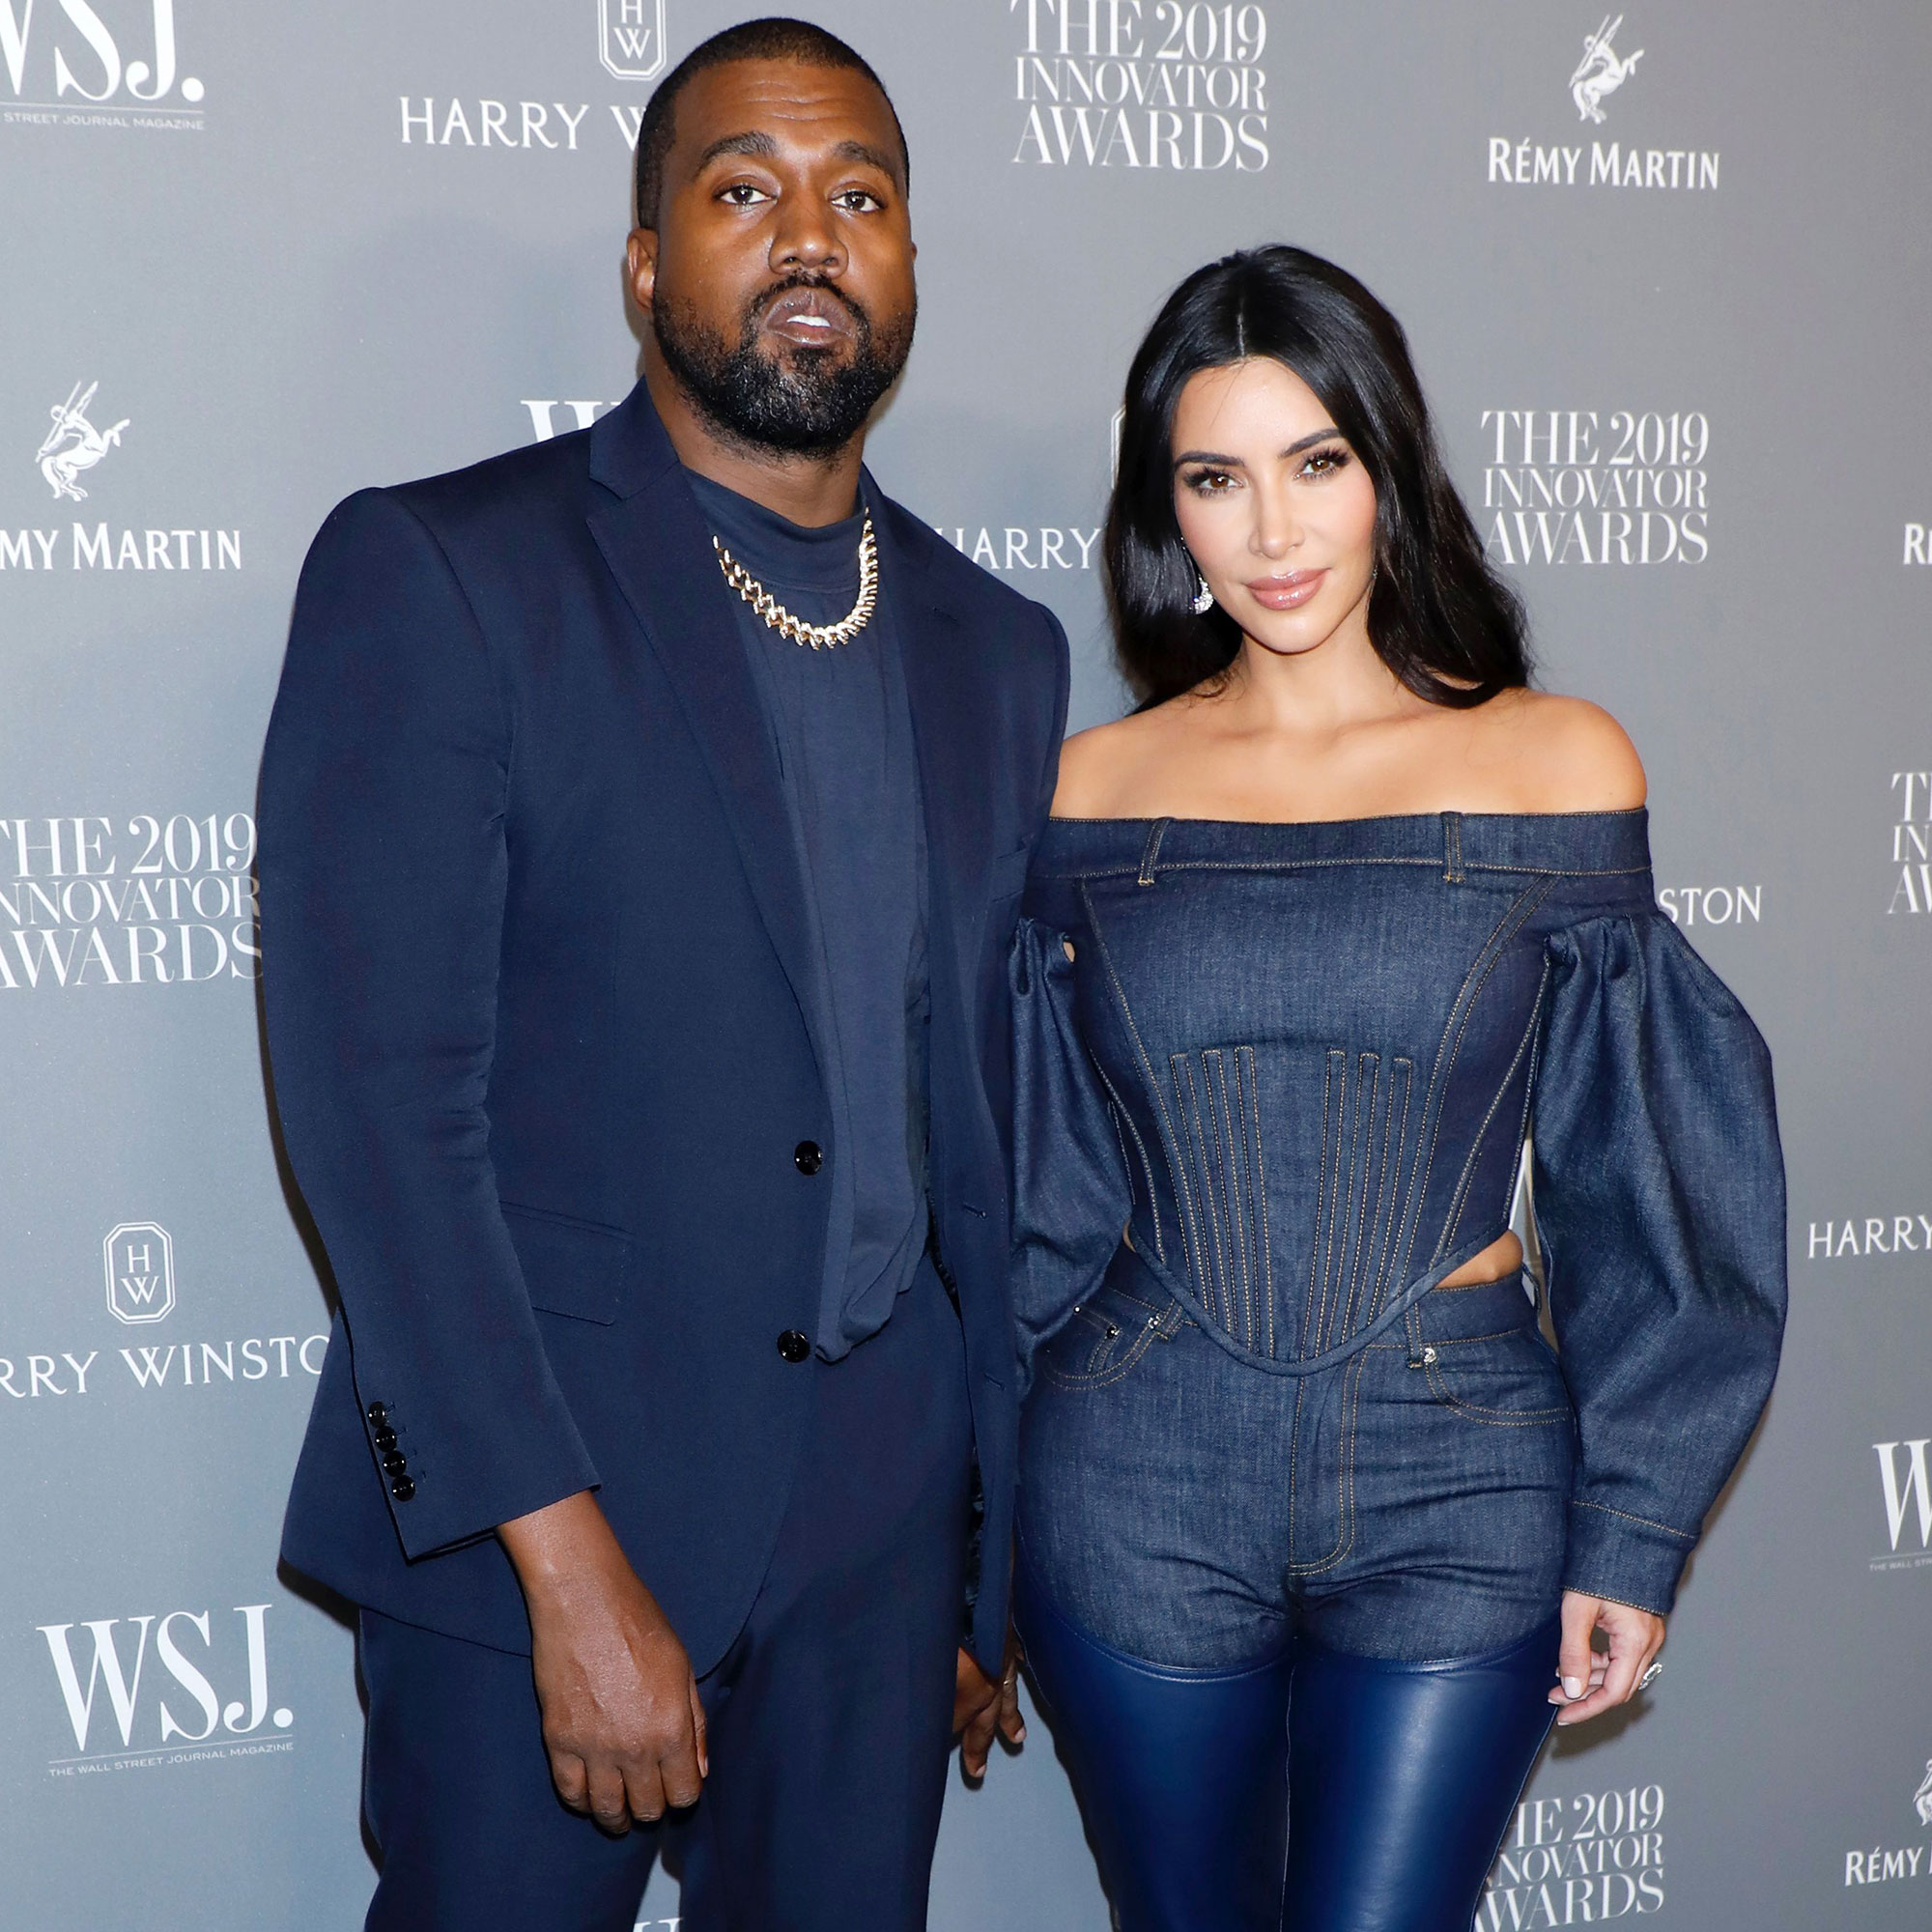 Kim Kardashian and Kanye West divorce details: What's really going